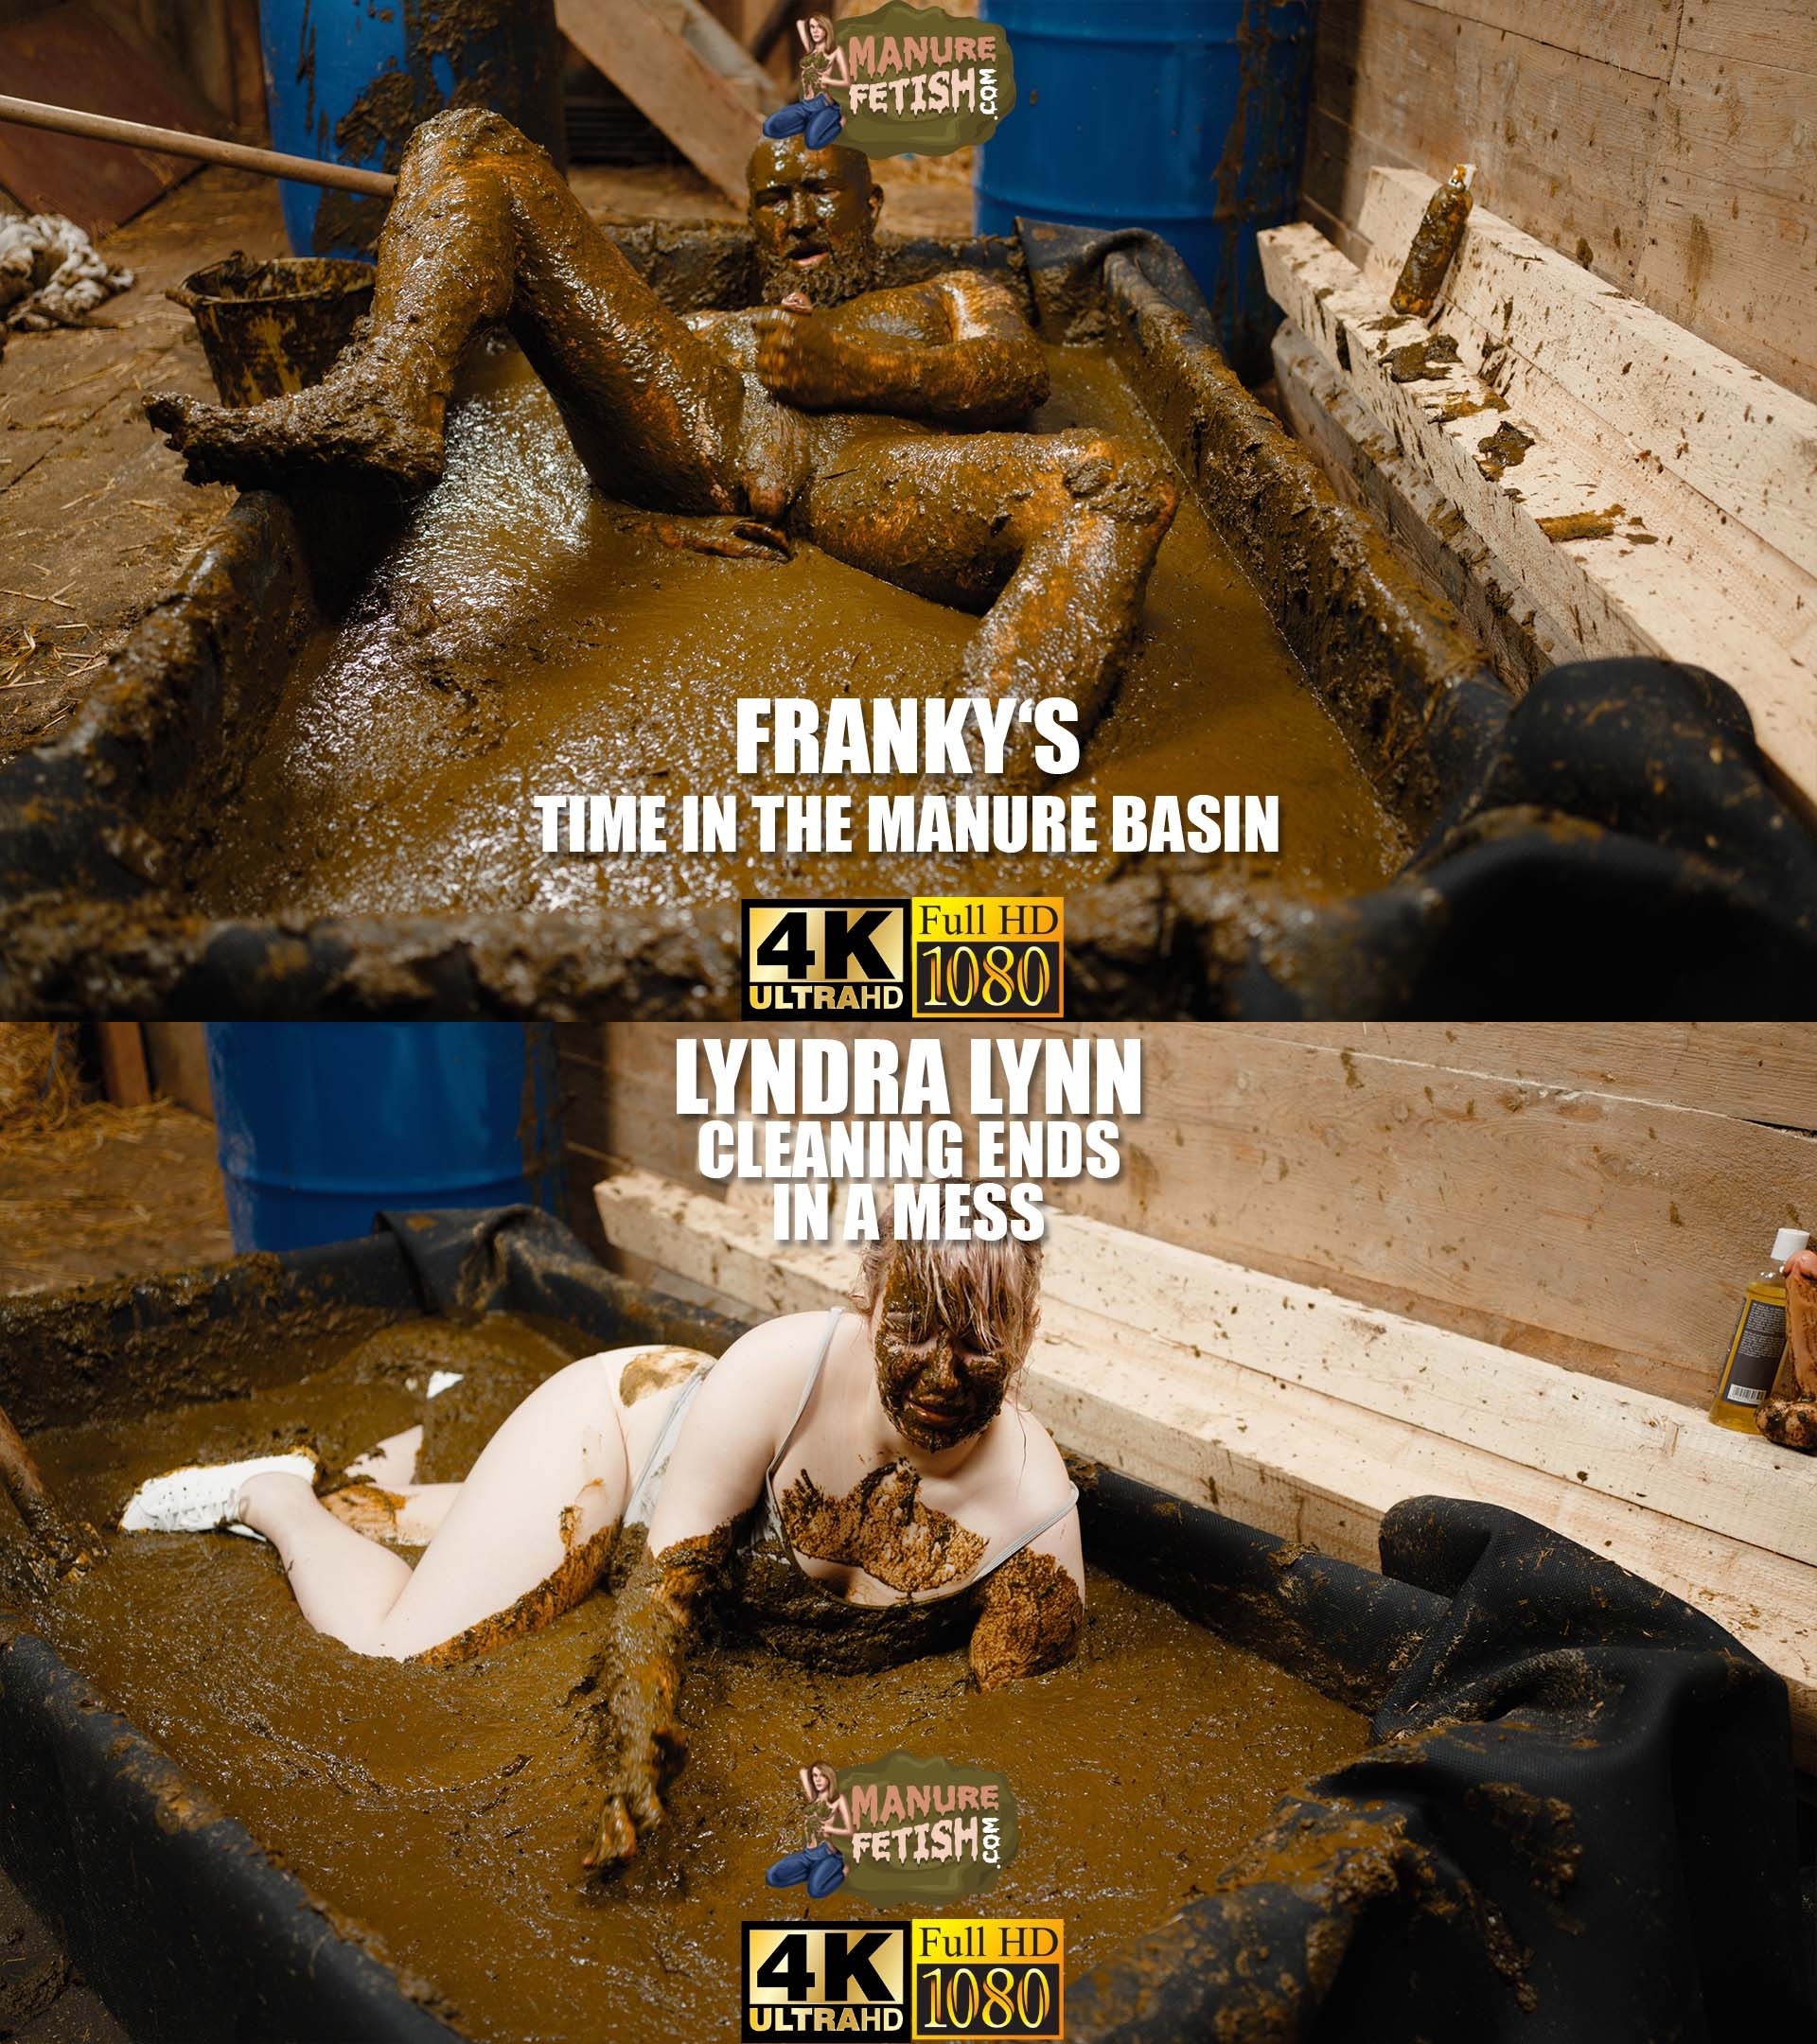 frankys time in the manure basin + lyndra lynn cleaning ends in a mess (24.99€+14.99€ ManureFetish)